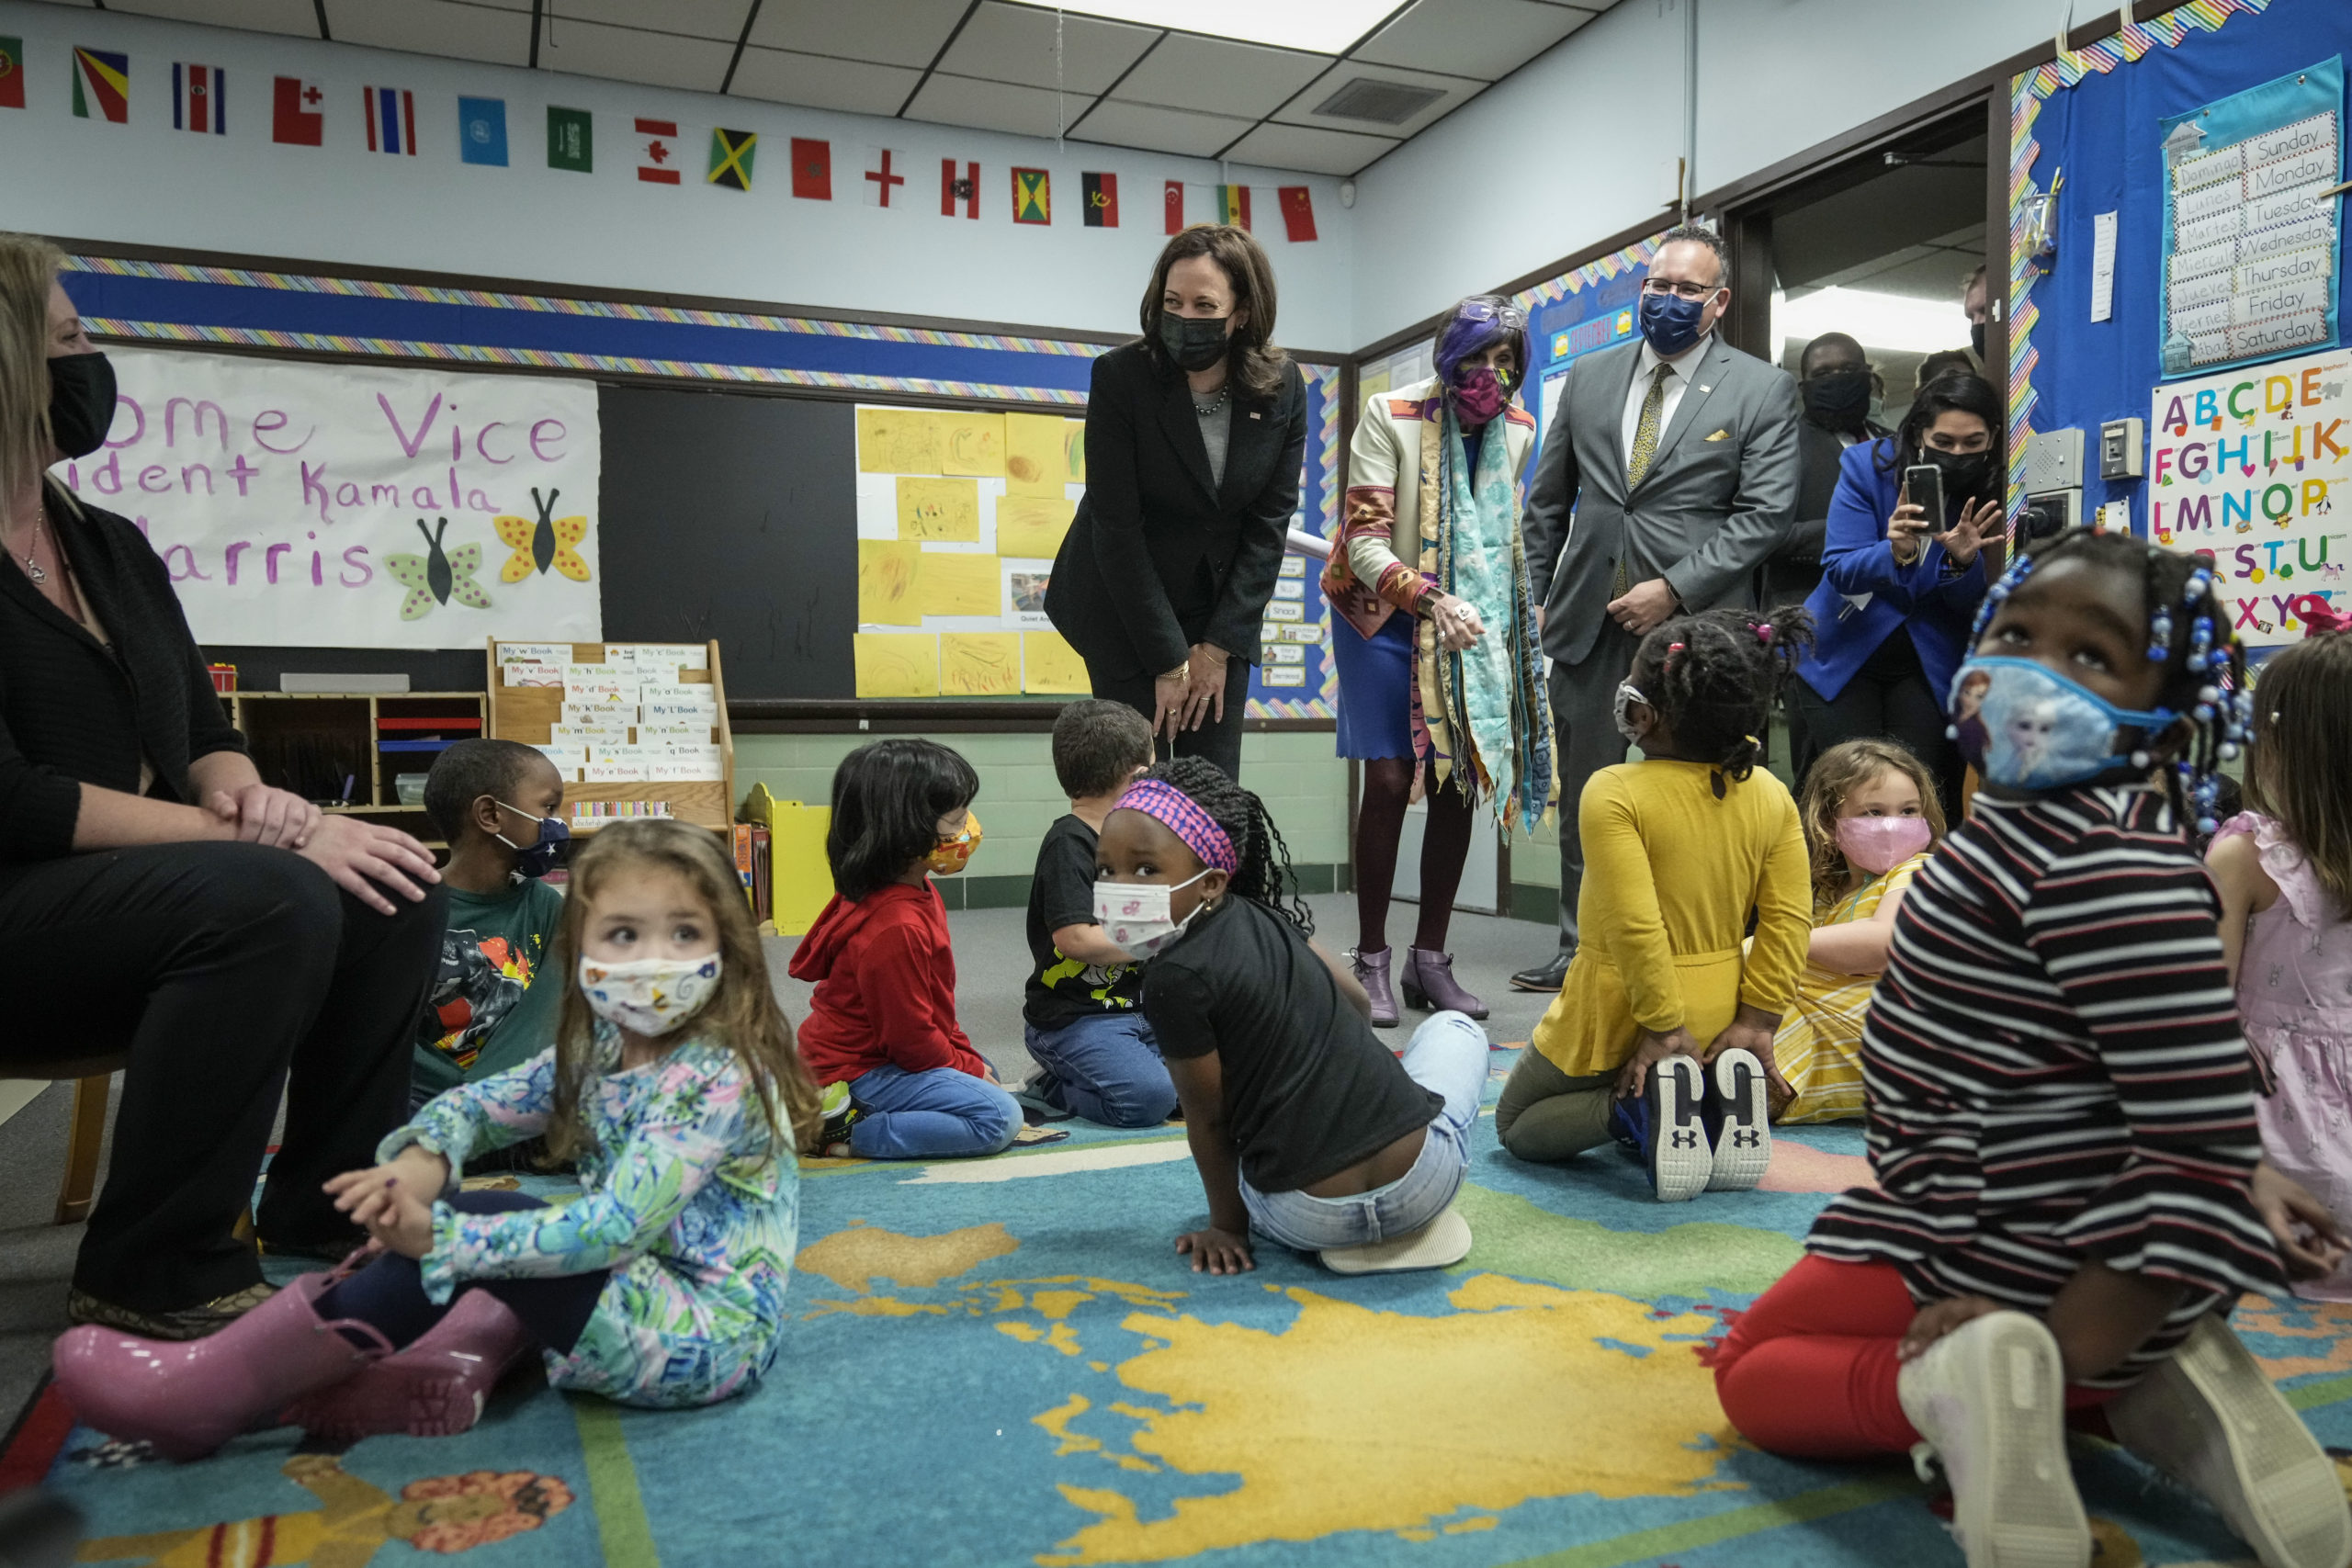 Vice President Kamala Harris and Secretary of Education Miguel Cardona visit a classroom on March 26 in West Haven, Connecticut. (Drew Angerer/Getty Images)